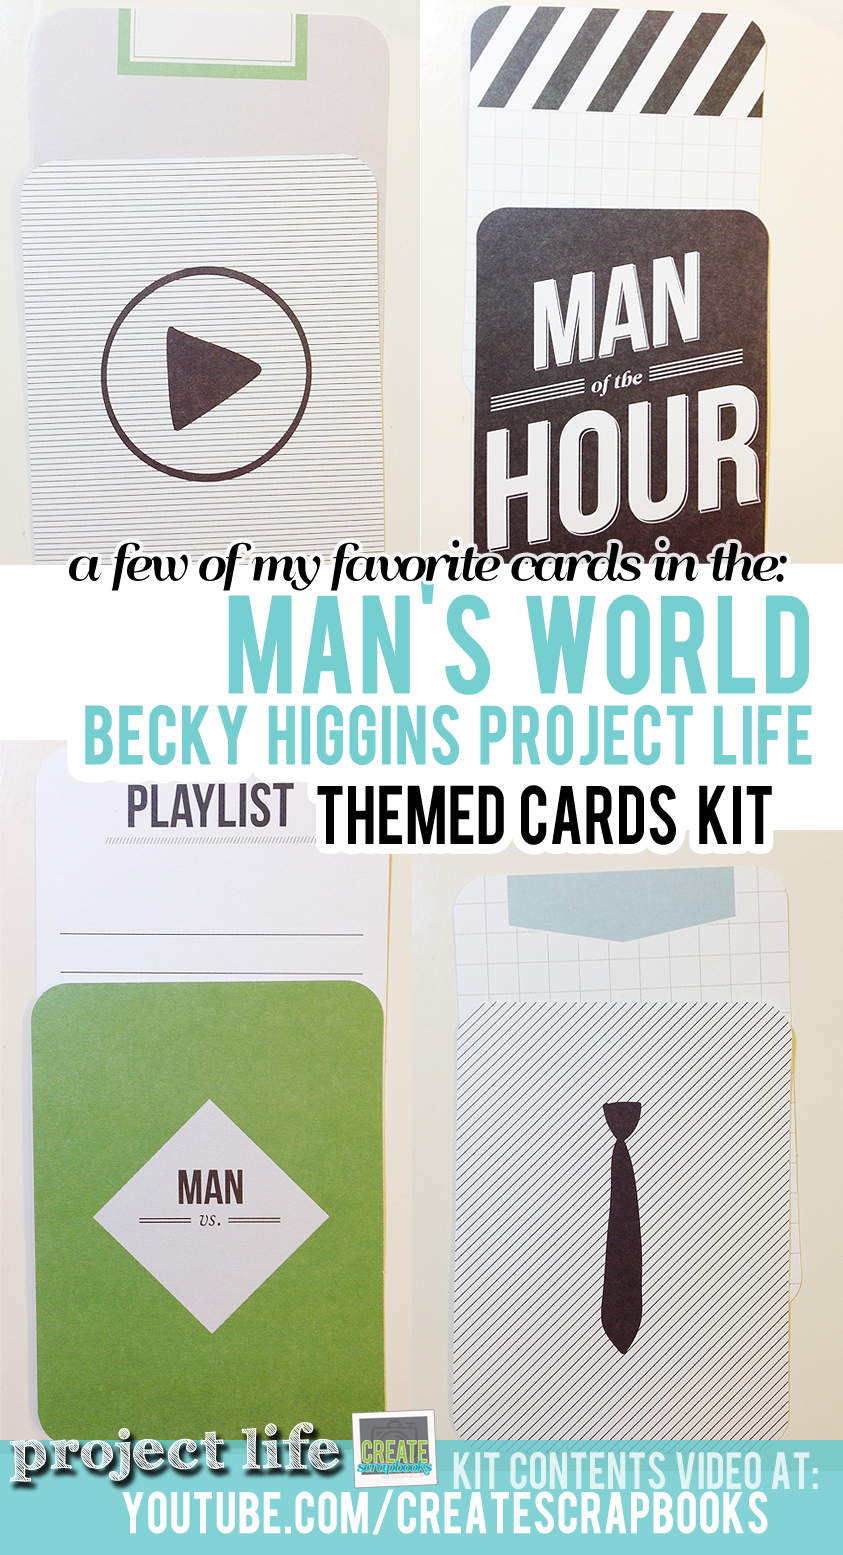 CreateScrapbooks.com My favorite cards in the Project Life Man's World Themed Card Set by Becky Higgins